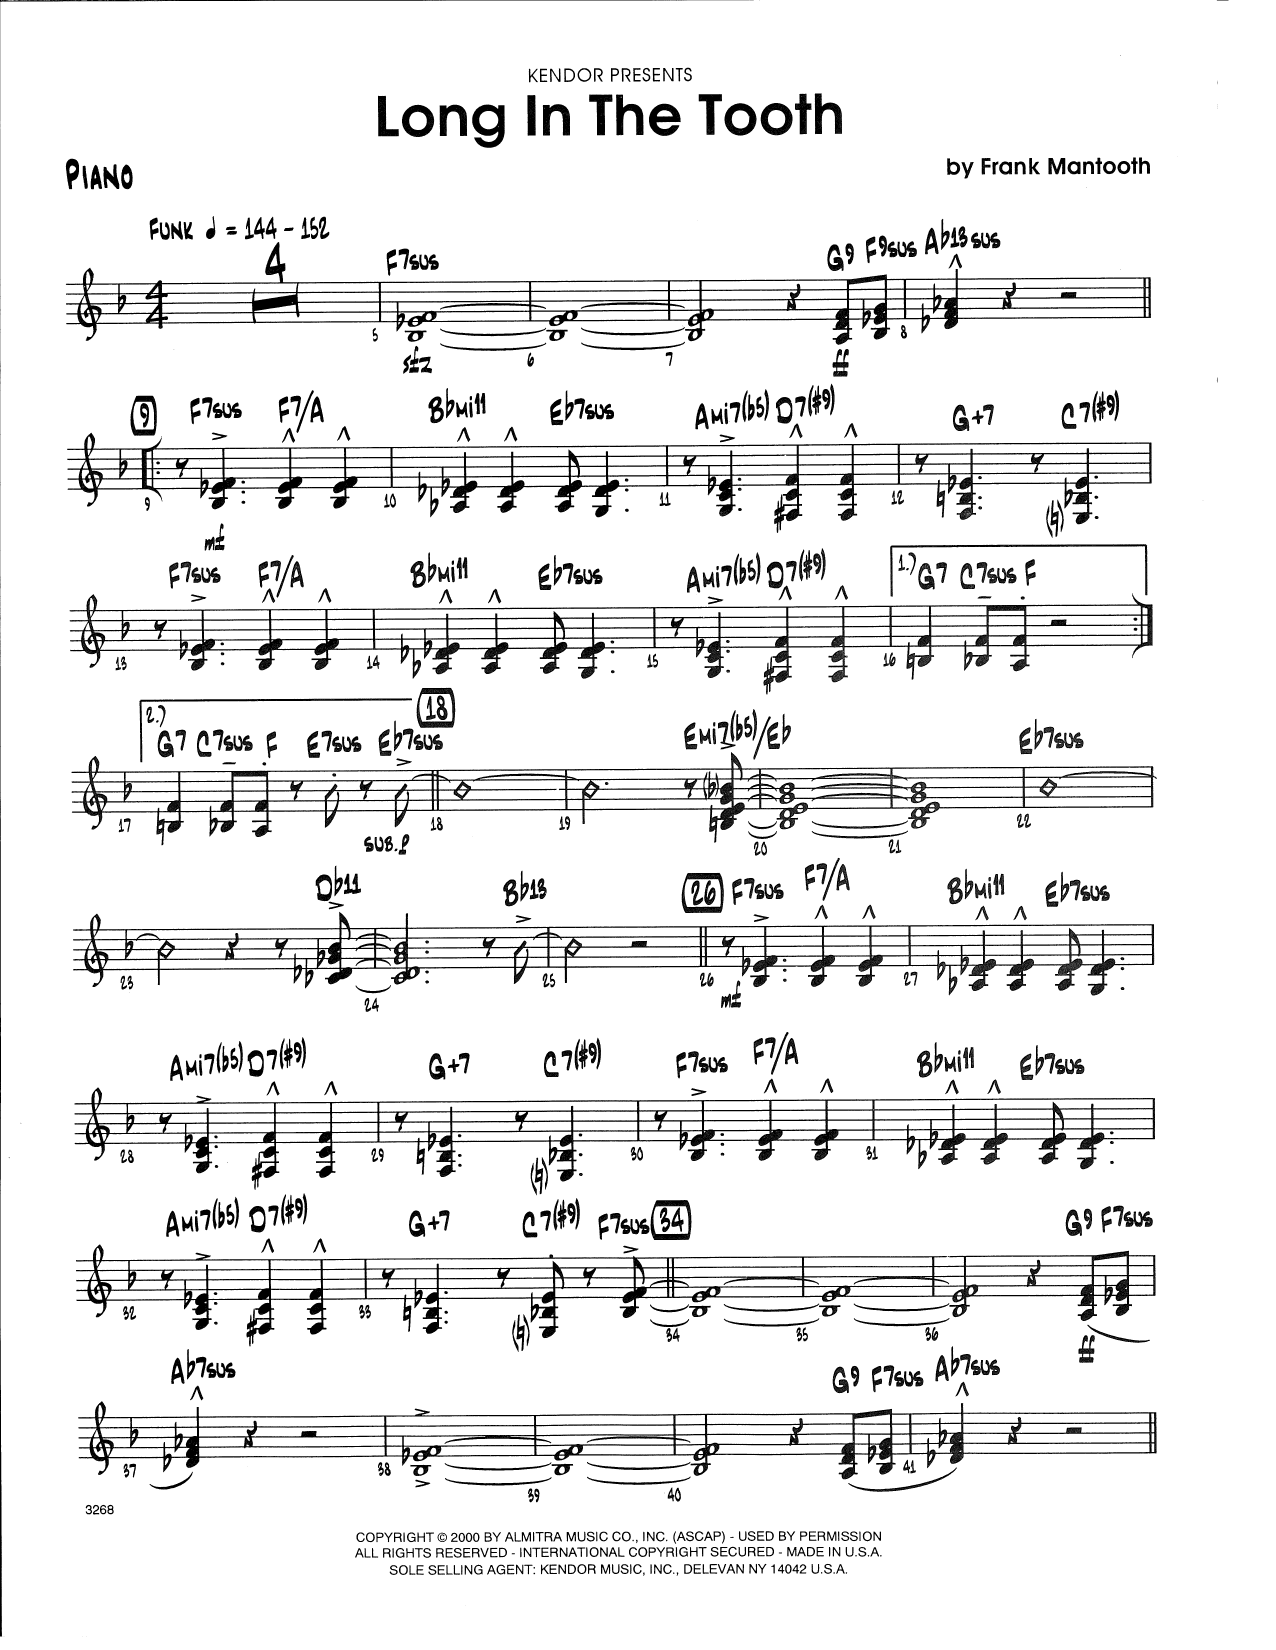 Download Frank Mantooth Long In The Tooth - Piano Sheet Music